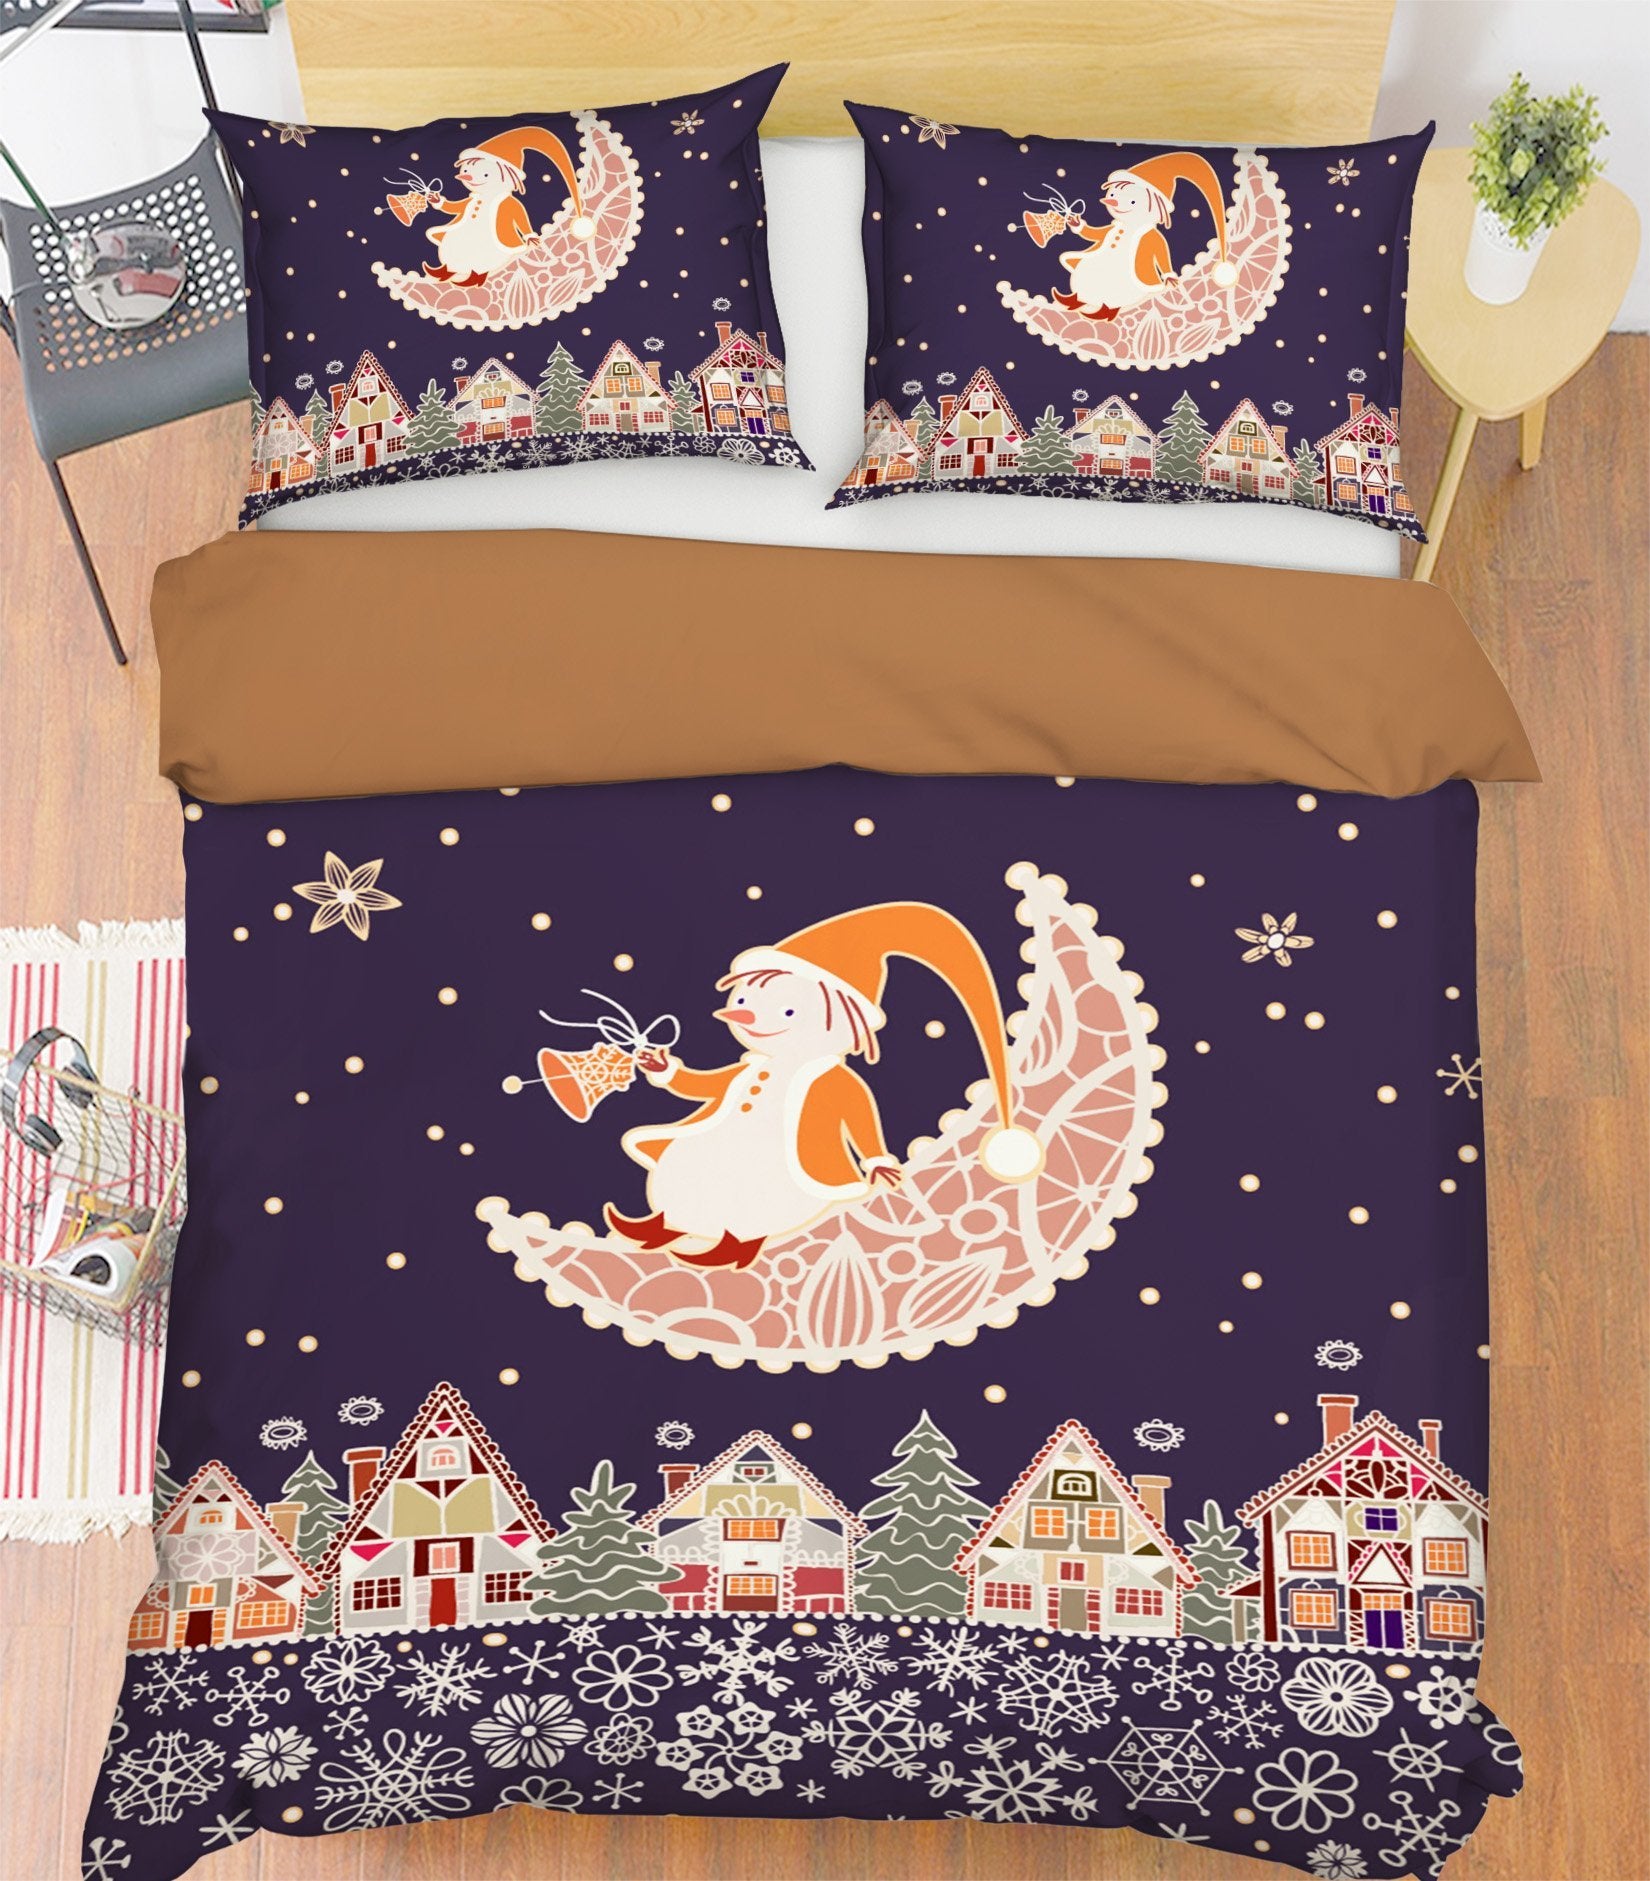 3D Christmas Lace Moon 39 Bed Pillowcases Quilt Quiet Covers AJ Creativity Home 